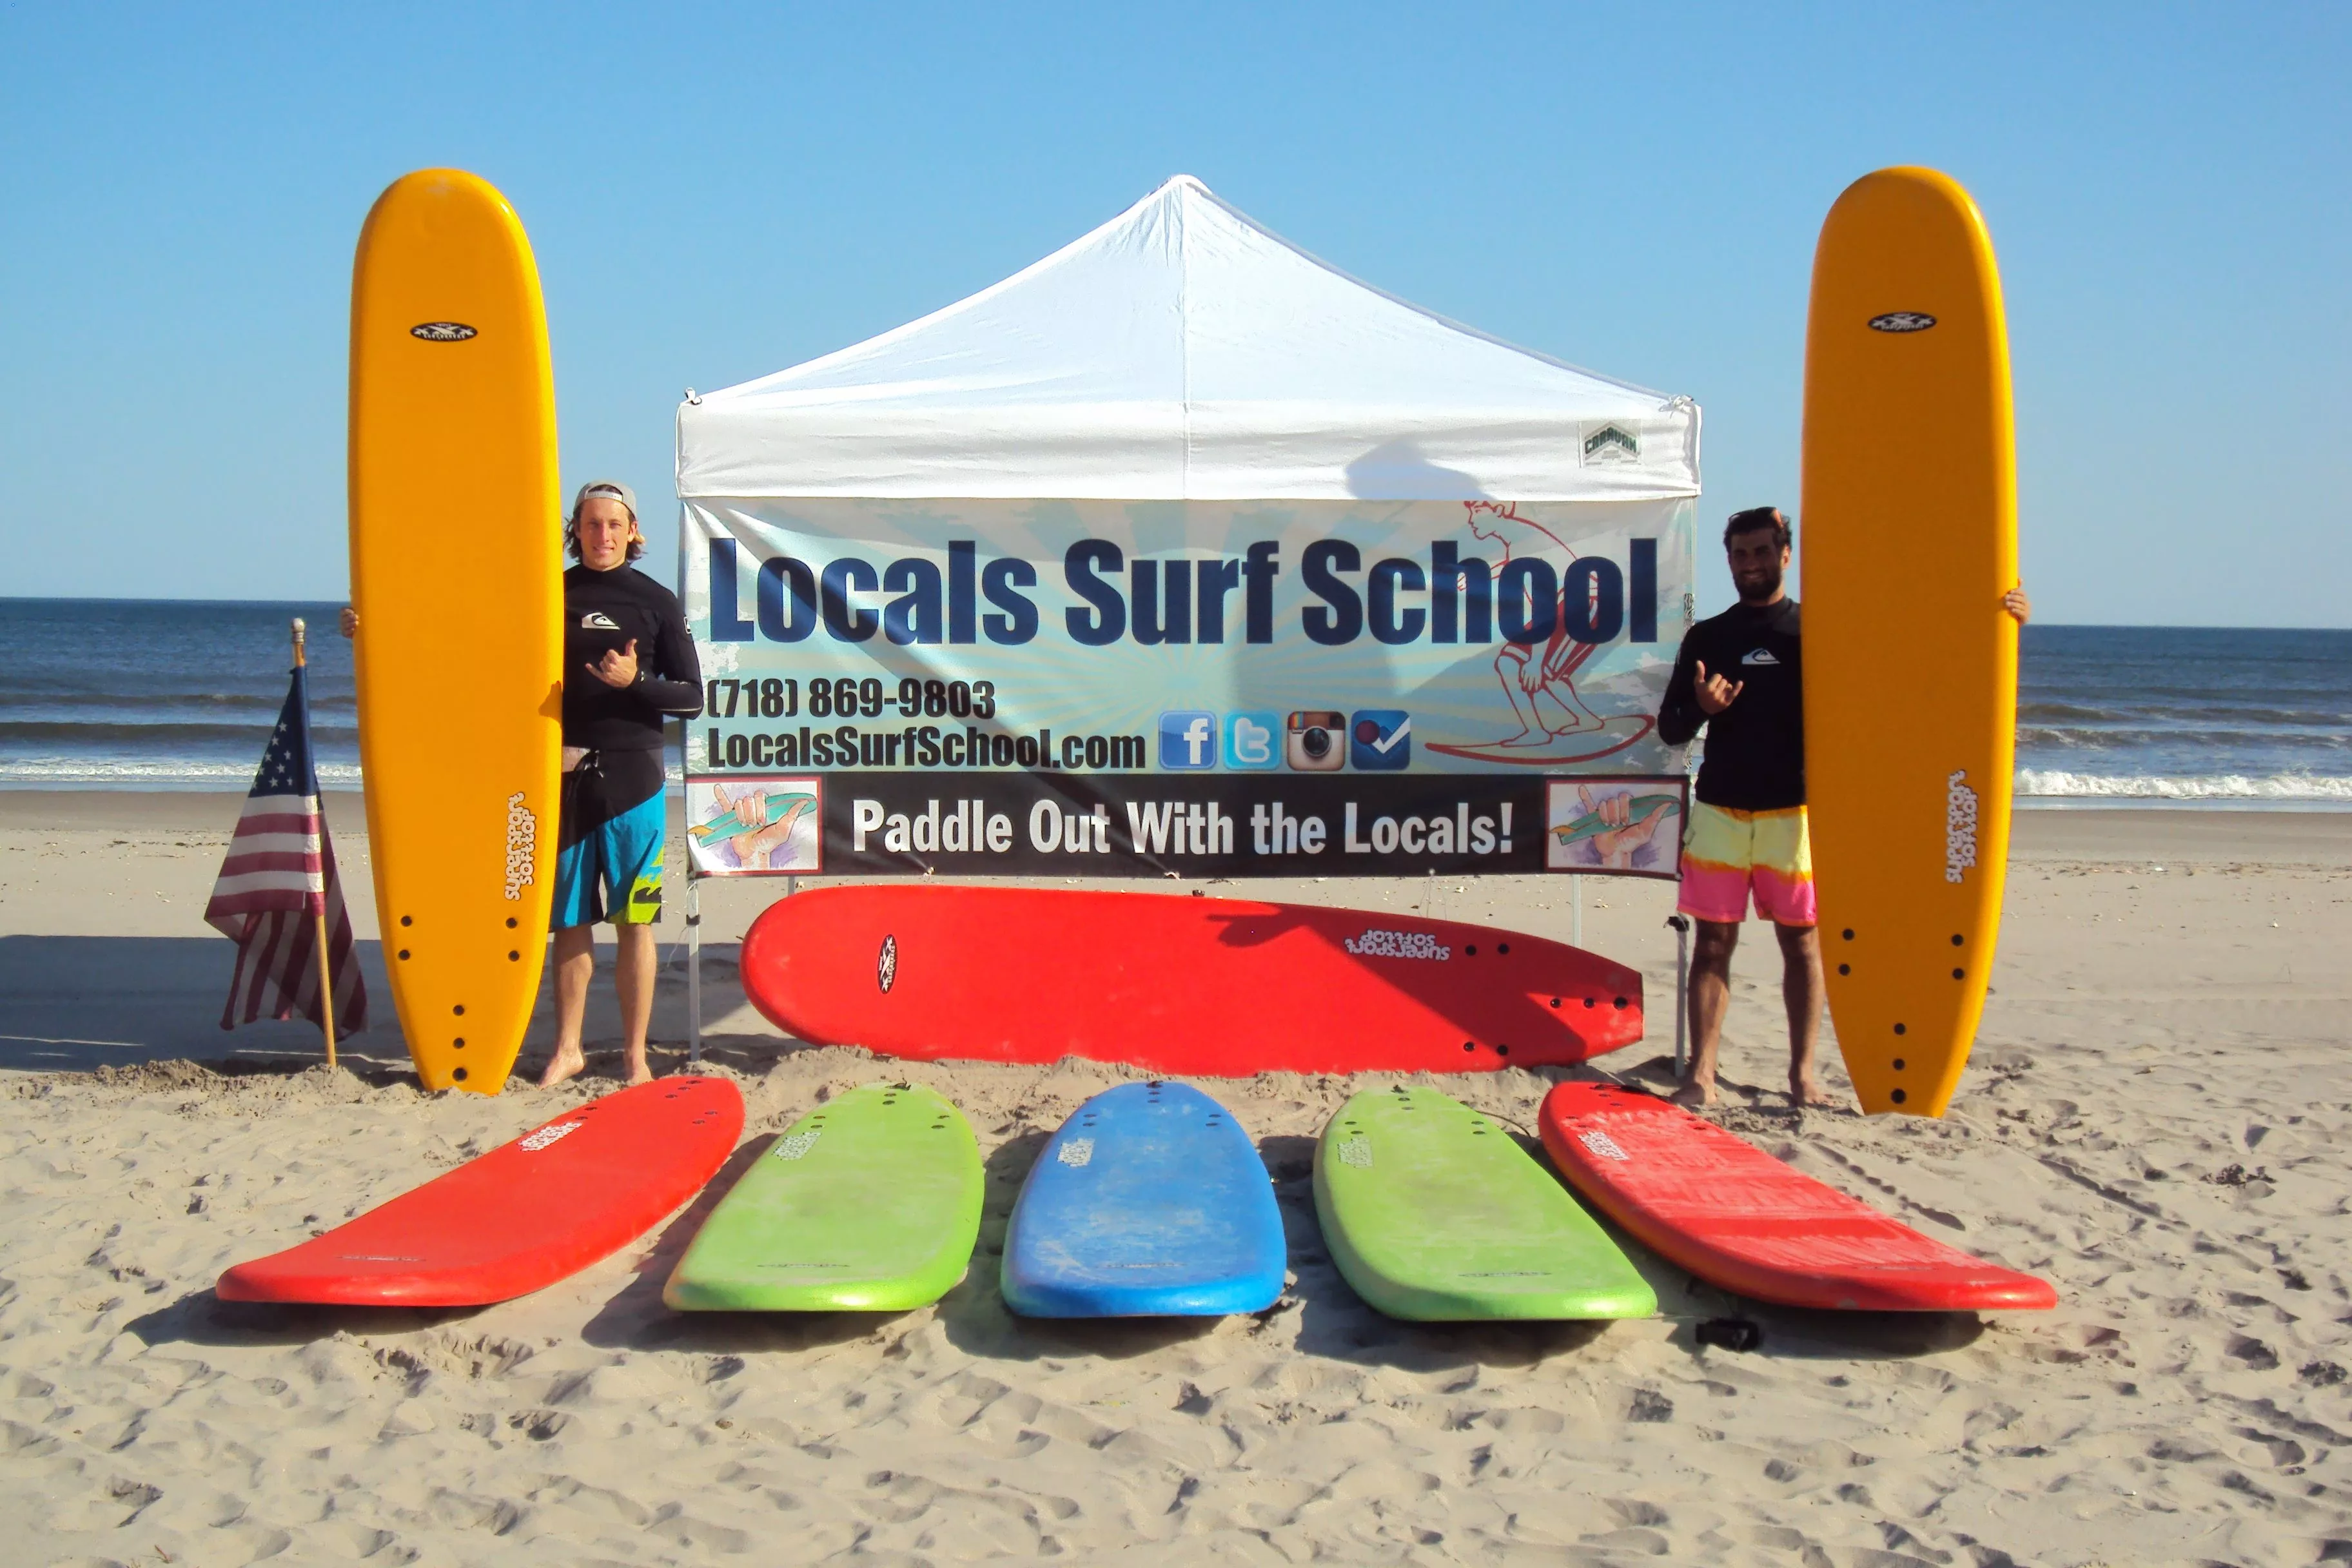 Caribbean Surf School & Shop in Costa Rica, North America | Surfing - Rated 0.9